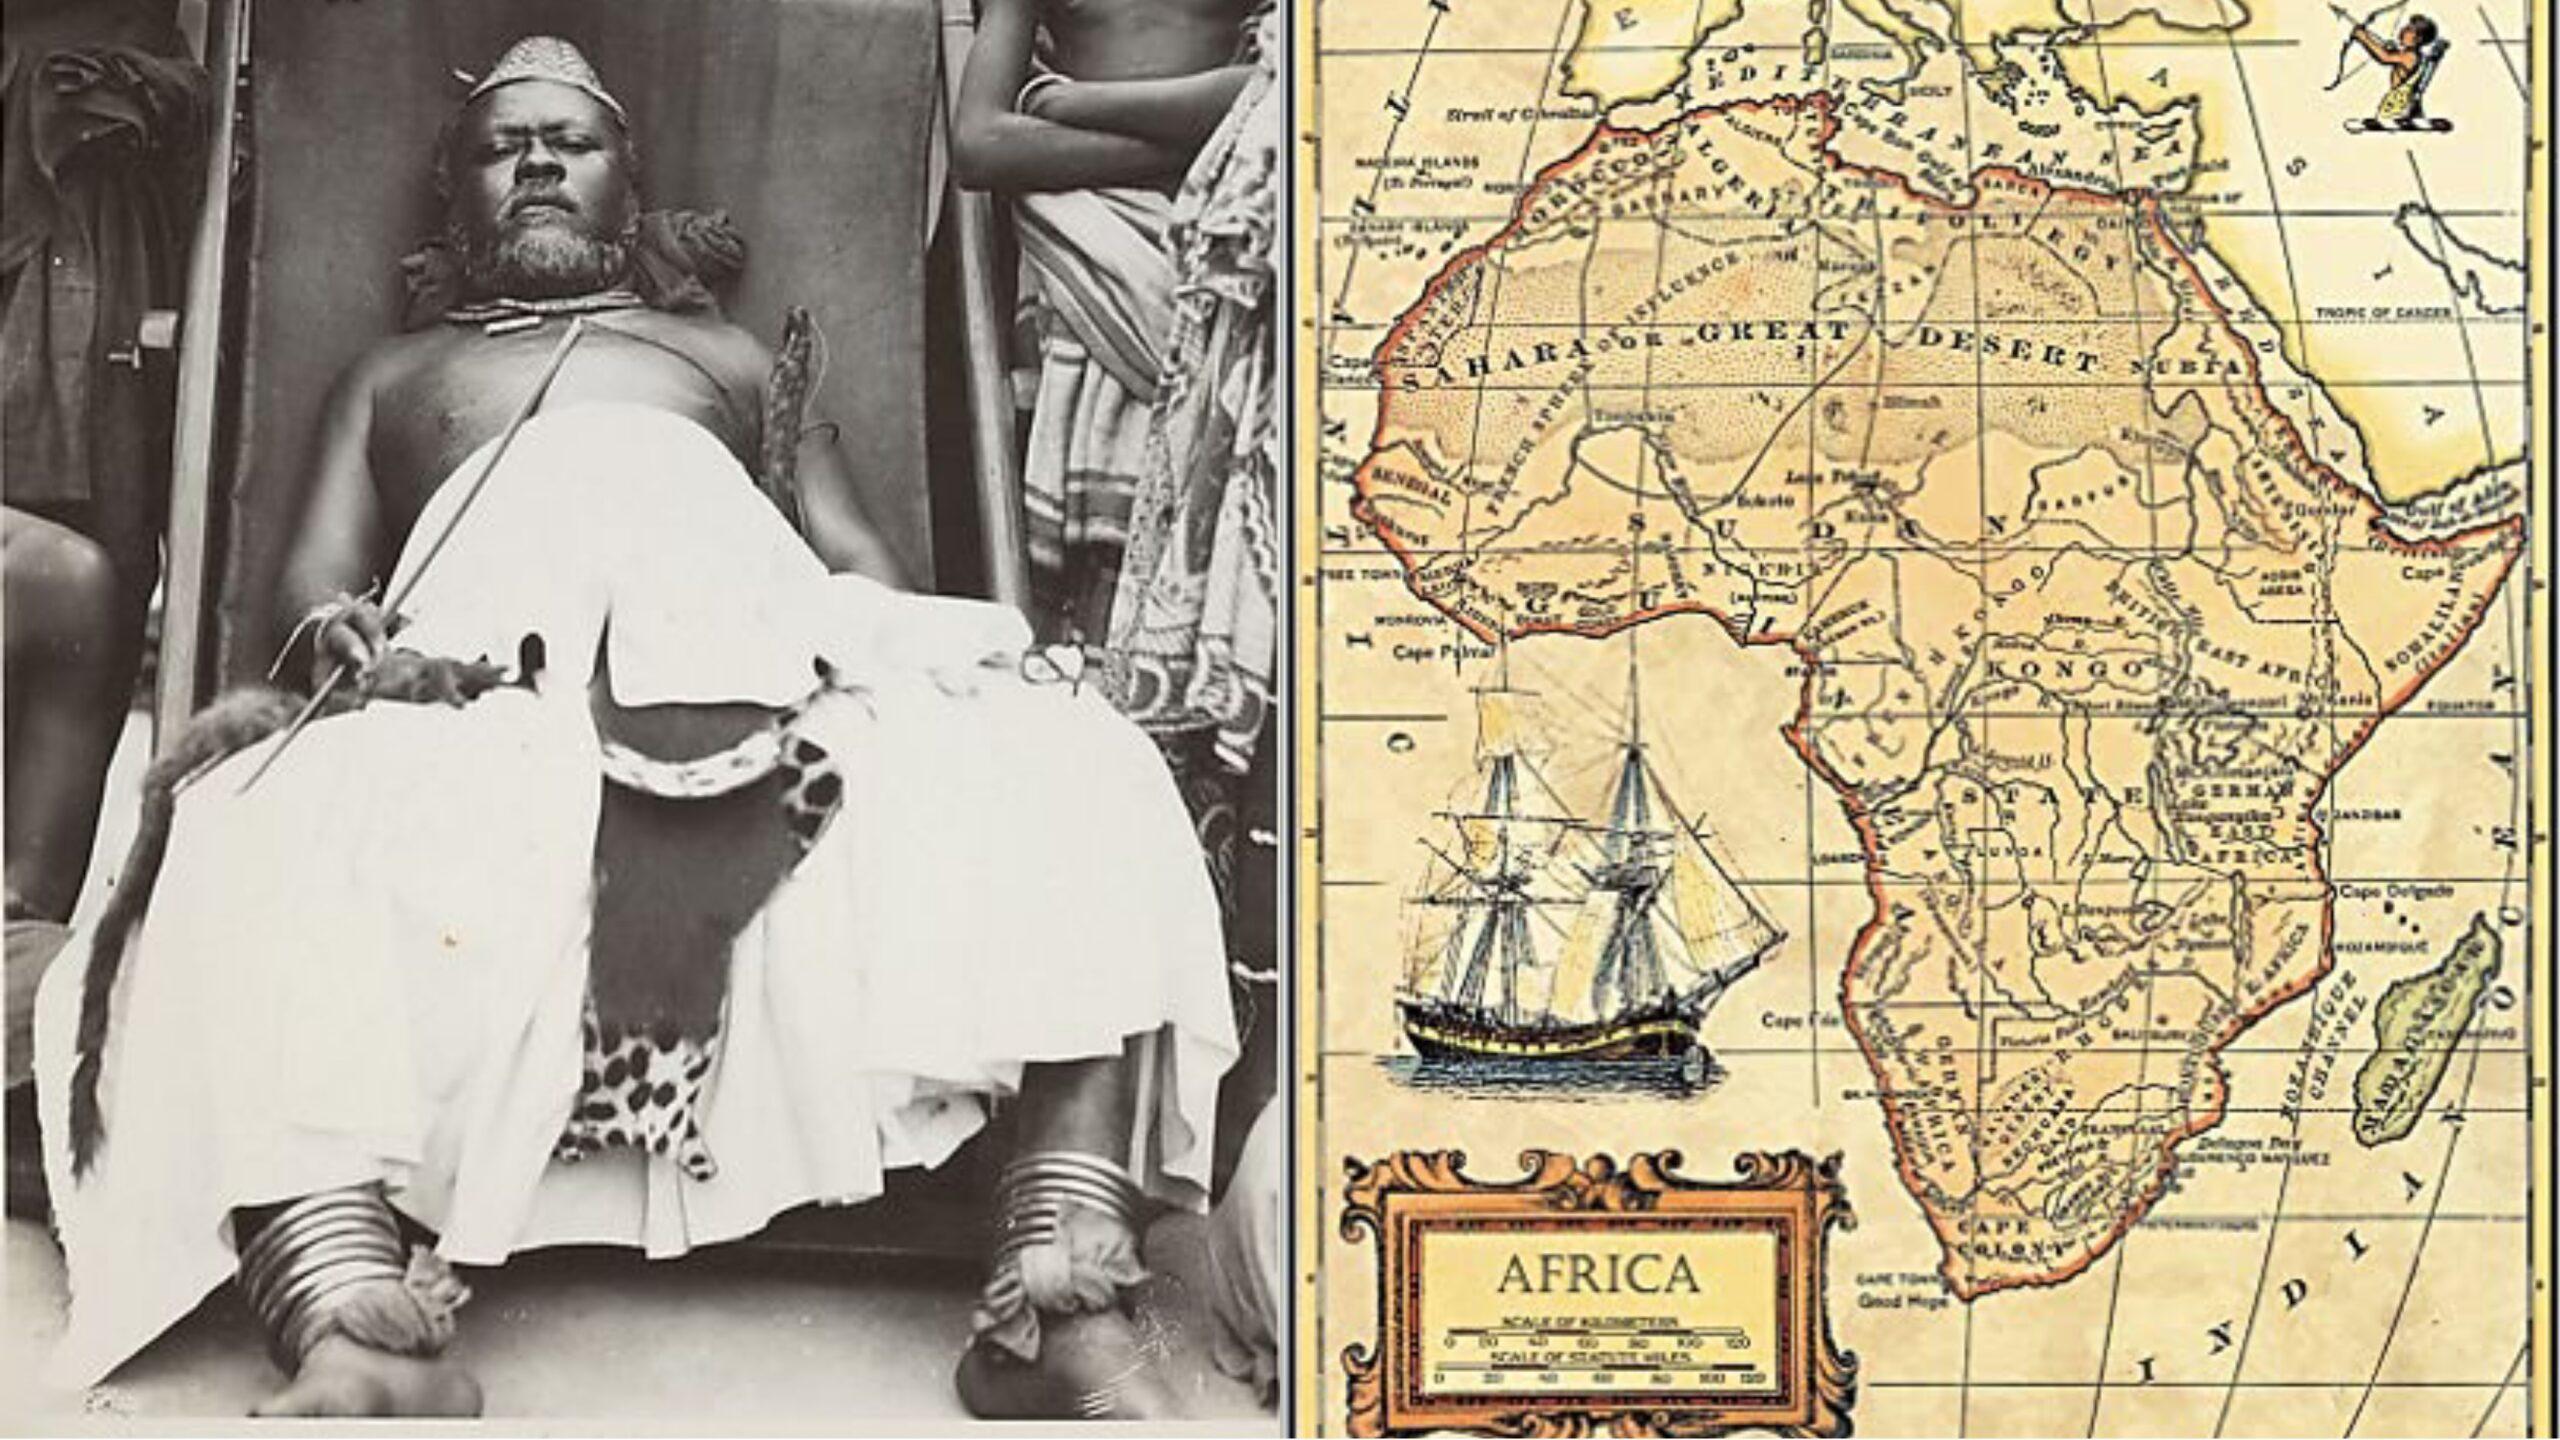 Kot Mabiinc, the paralysed king who ruled Kuba, the most culturally civilized kingdom in Africa